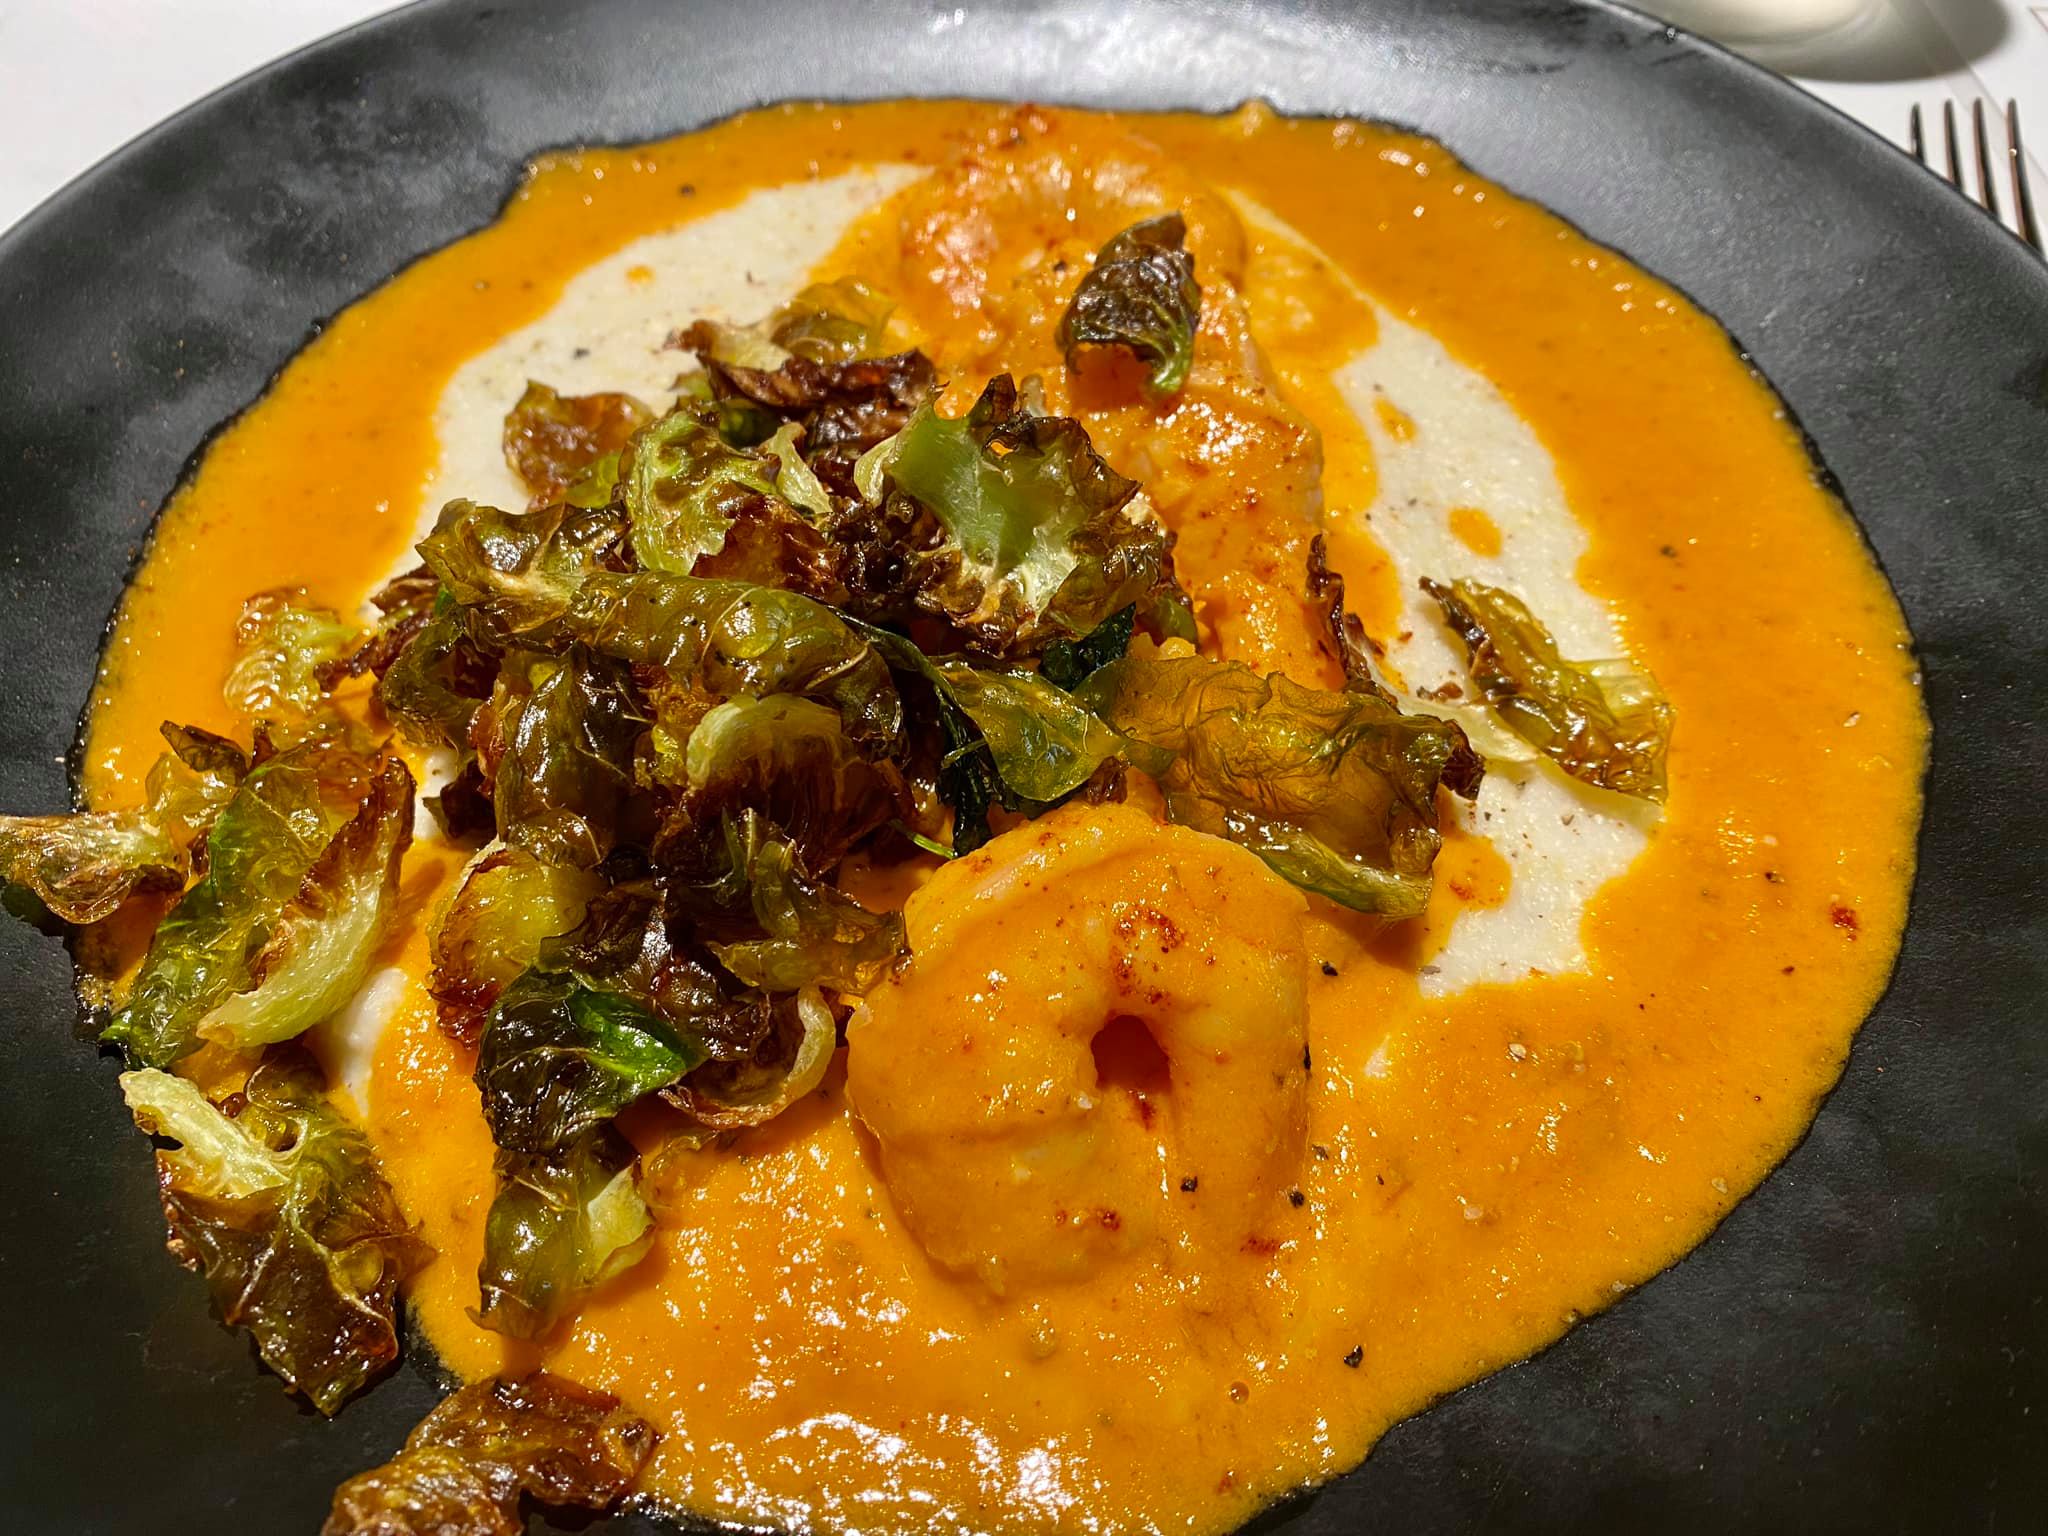 Shrimp & Grits- Blackened Shrimp, Cheese Grits, Fire Roasted Tomato Sauce, Fried Brussel Sprouts